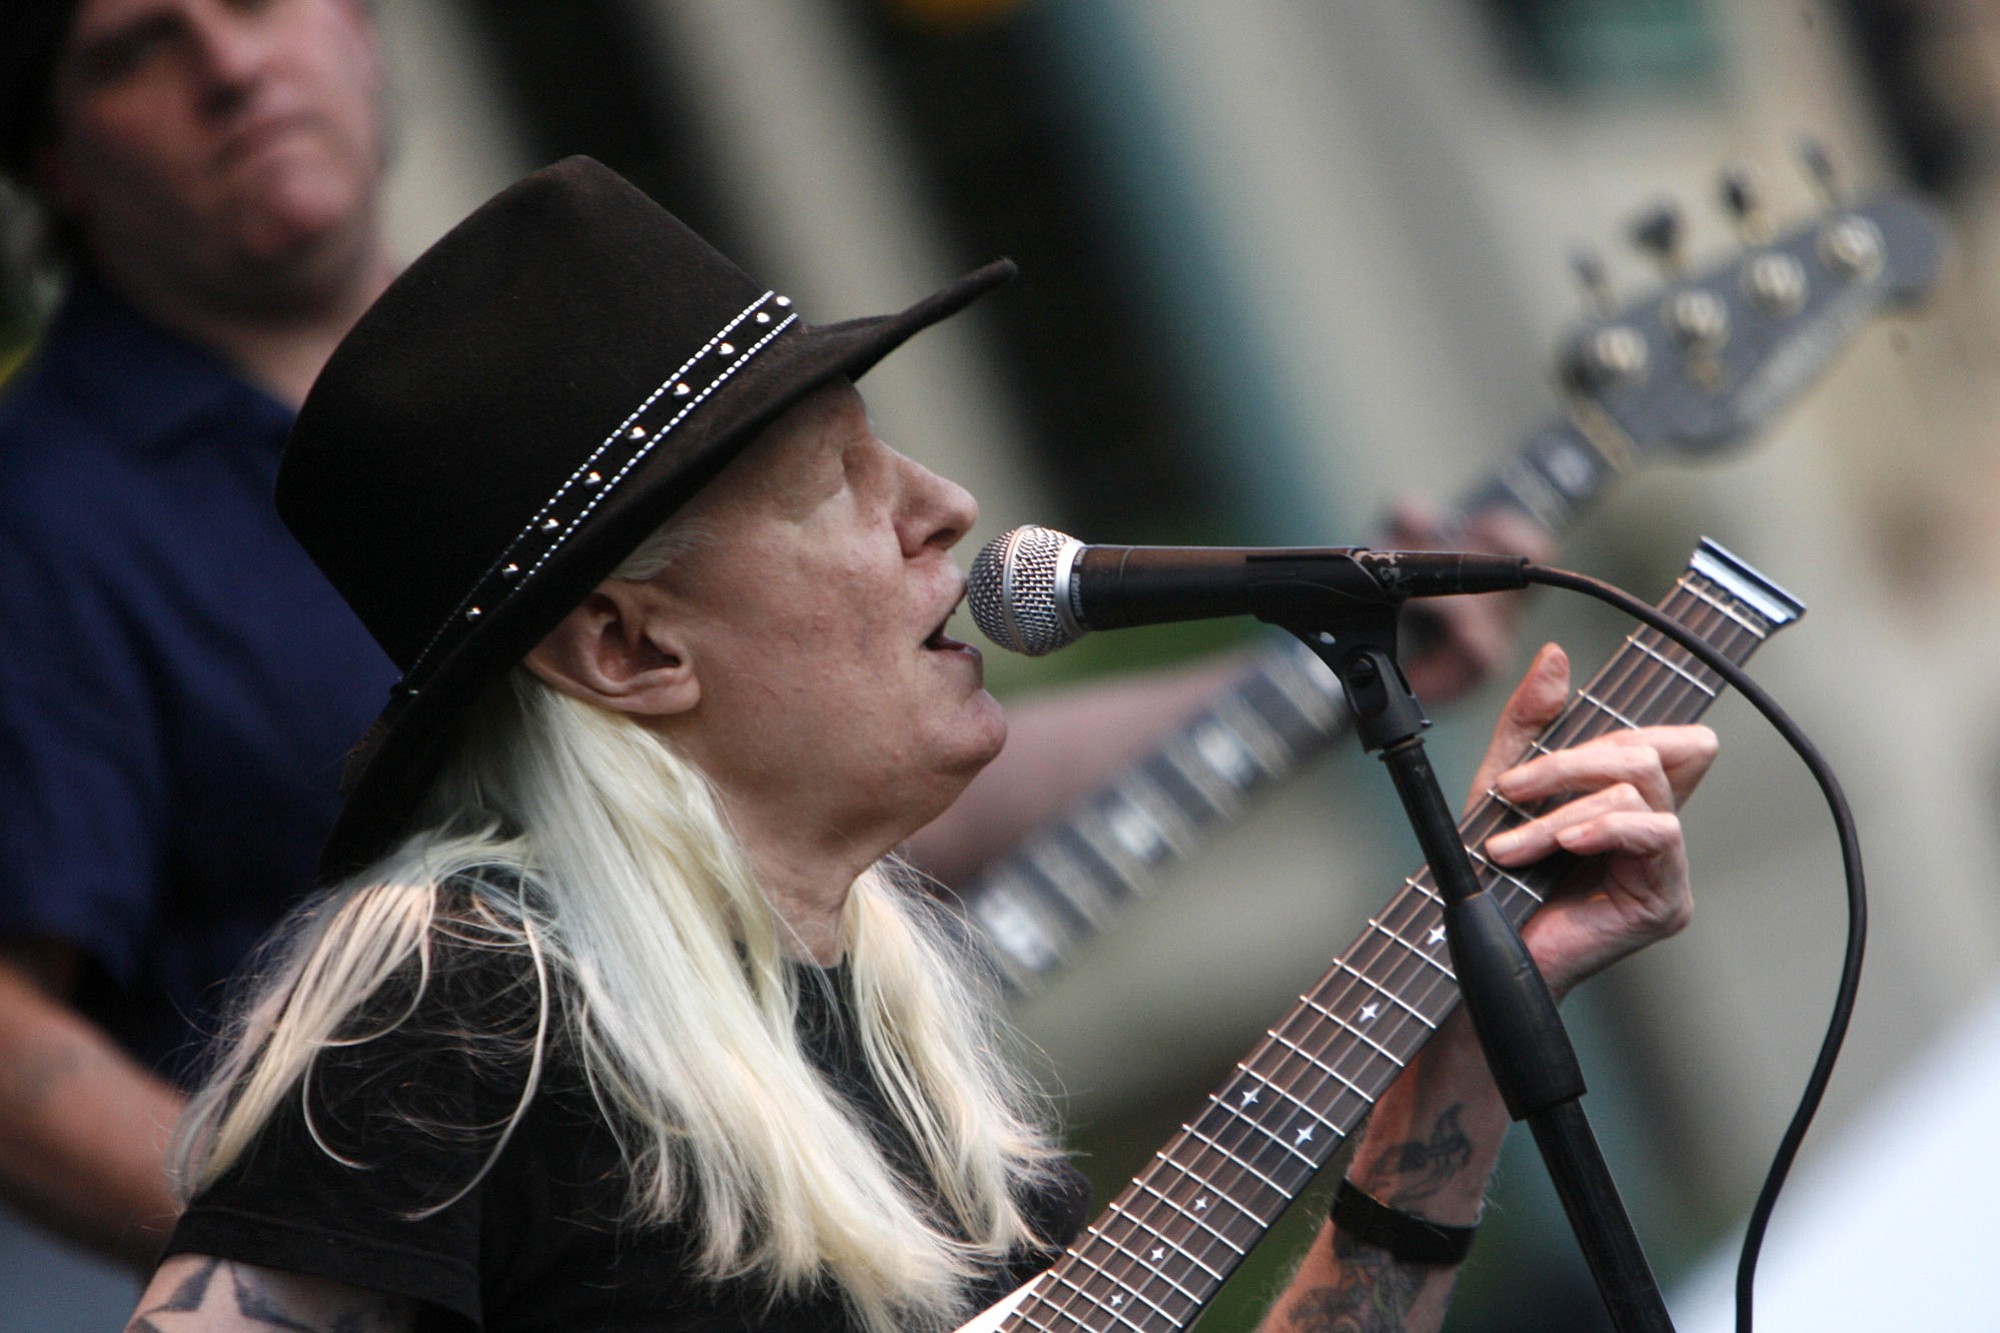 Johnny Winter plays June 19, 2009 during the Canton Blues Festival 2009 in downtown Canton, Ohio. Texas blues icon Johnny Winter, who rose to fame in the late 1960s and u201870s with his energetic performances and recordings that included producing his childhood hero Muddy Waters, died in Zurich, Switzerland on Wednesday.